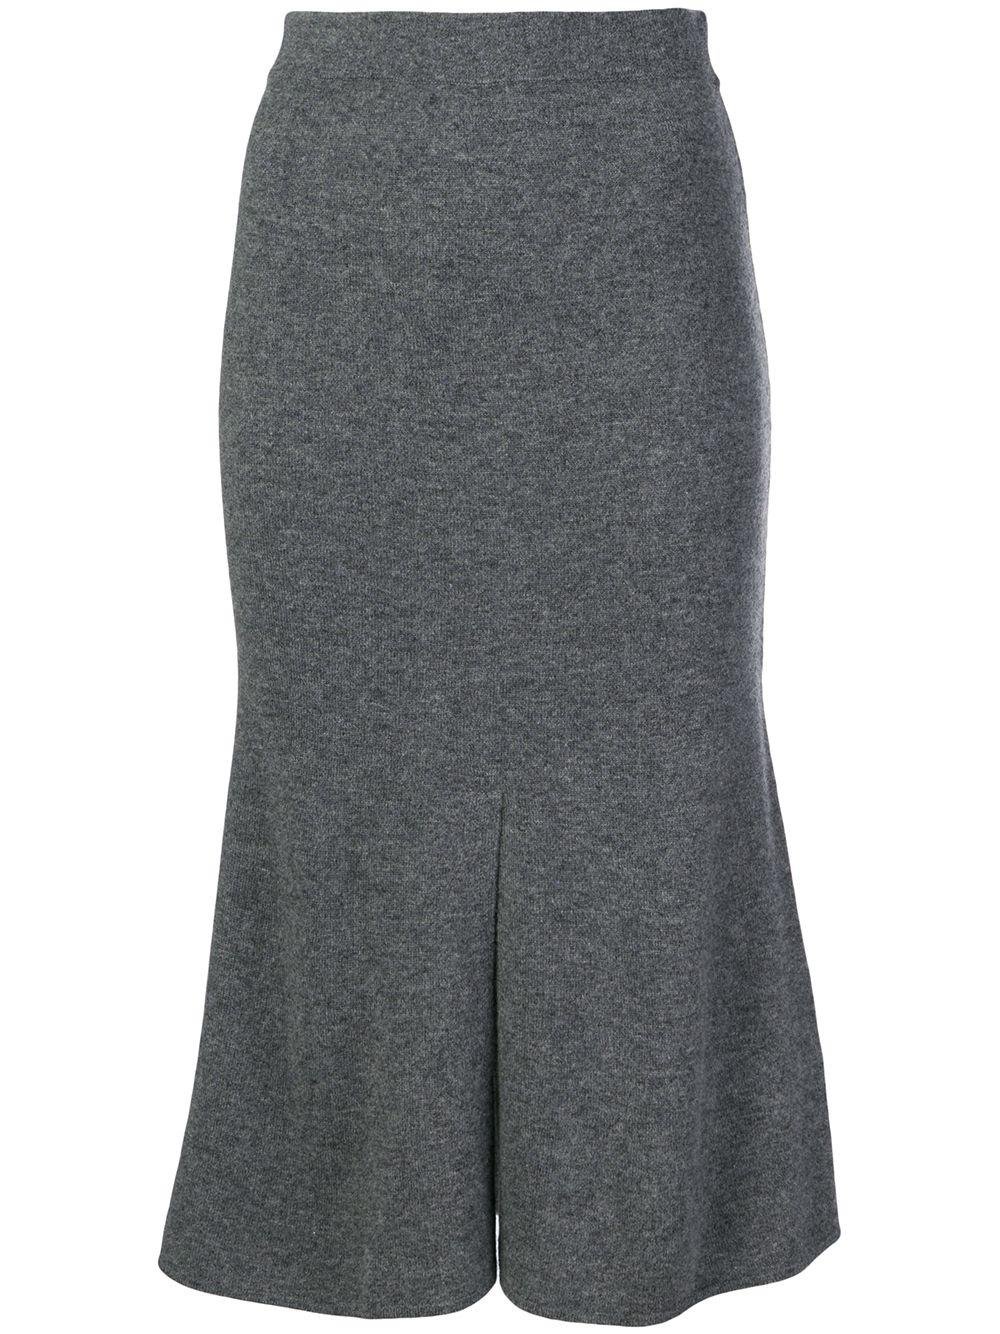 Tish skirt by CASHMERE IN LOVE